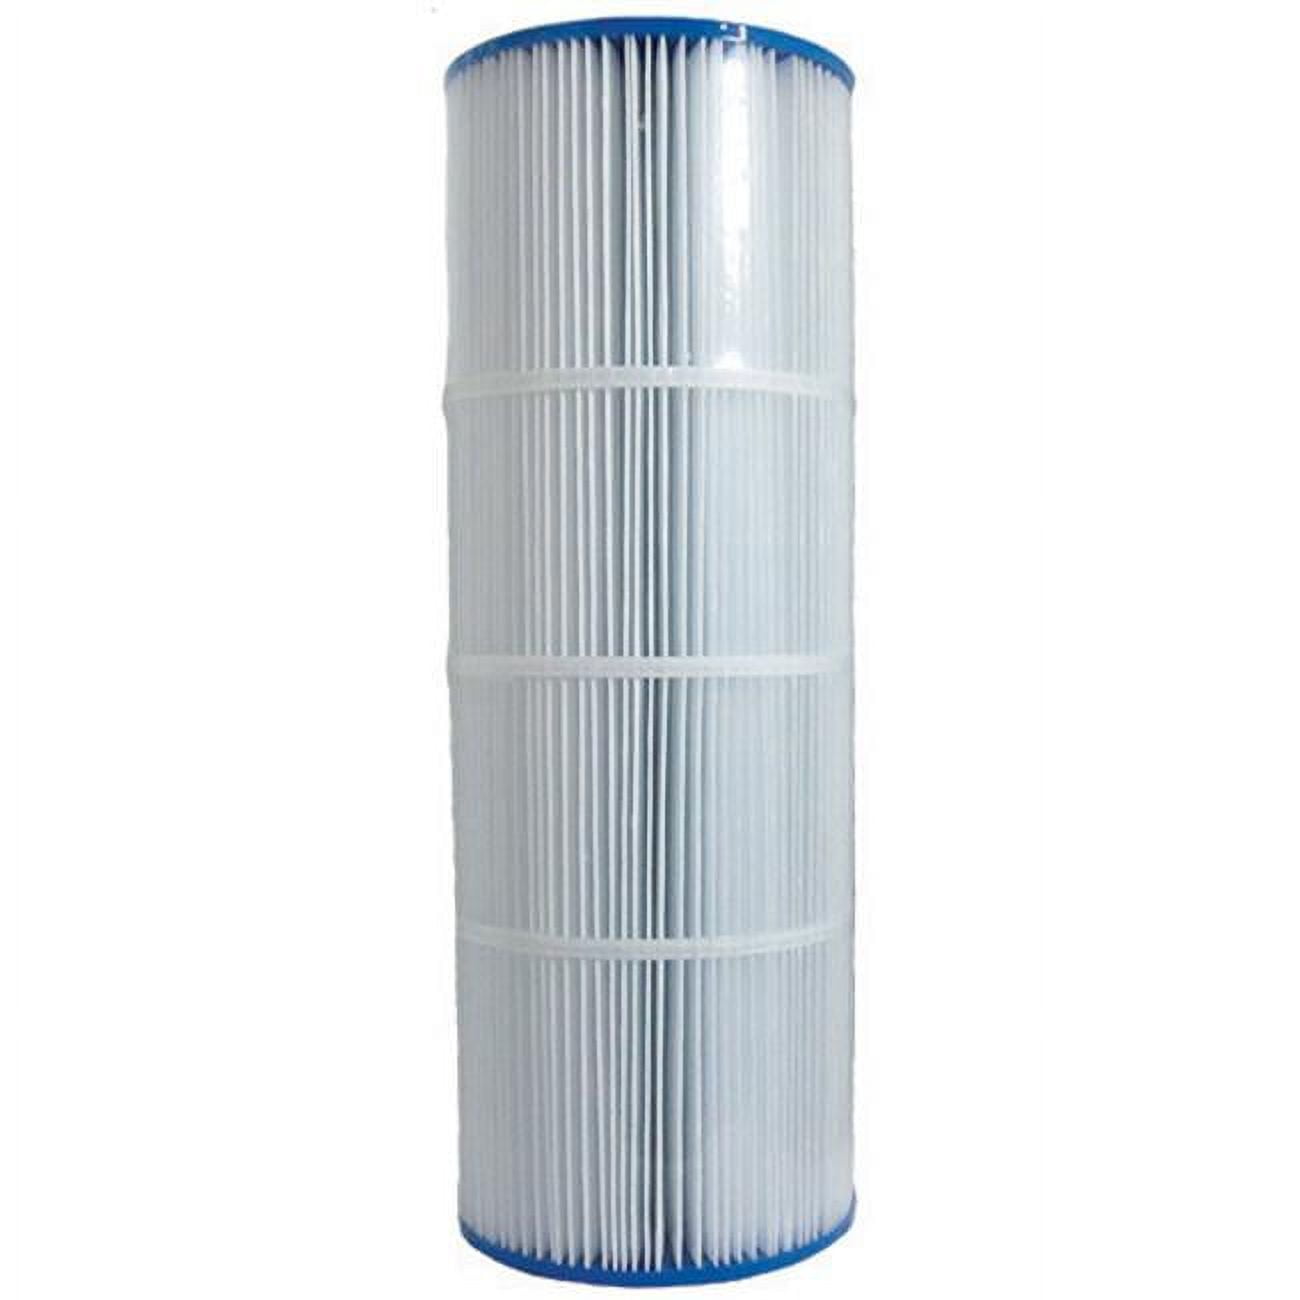 Picture of Unicel Filter Cartridges C7456 7 x 17 in. 7000 Series Gasket Replacement Cartridge